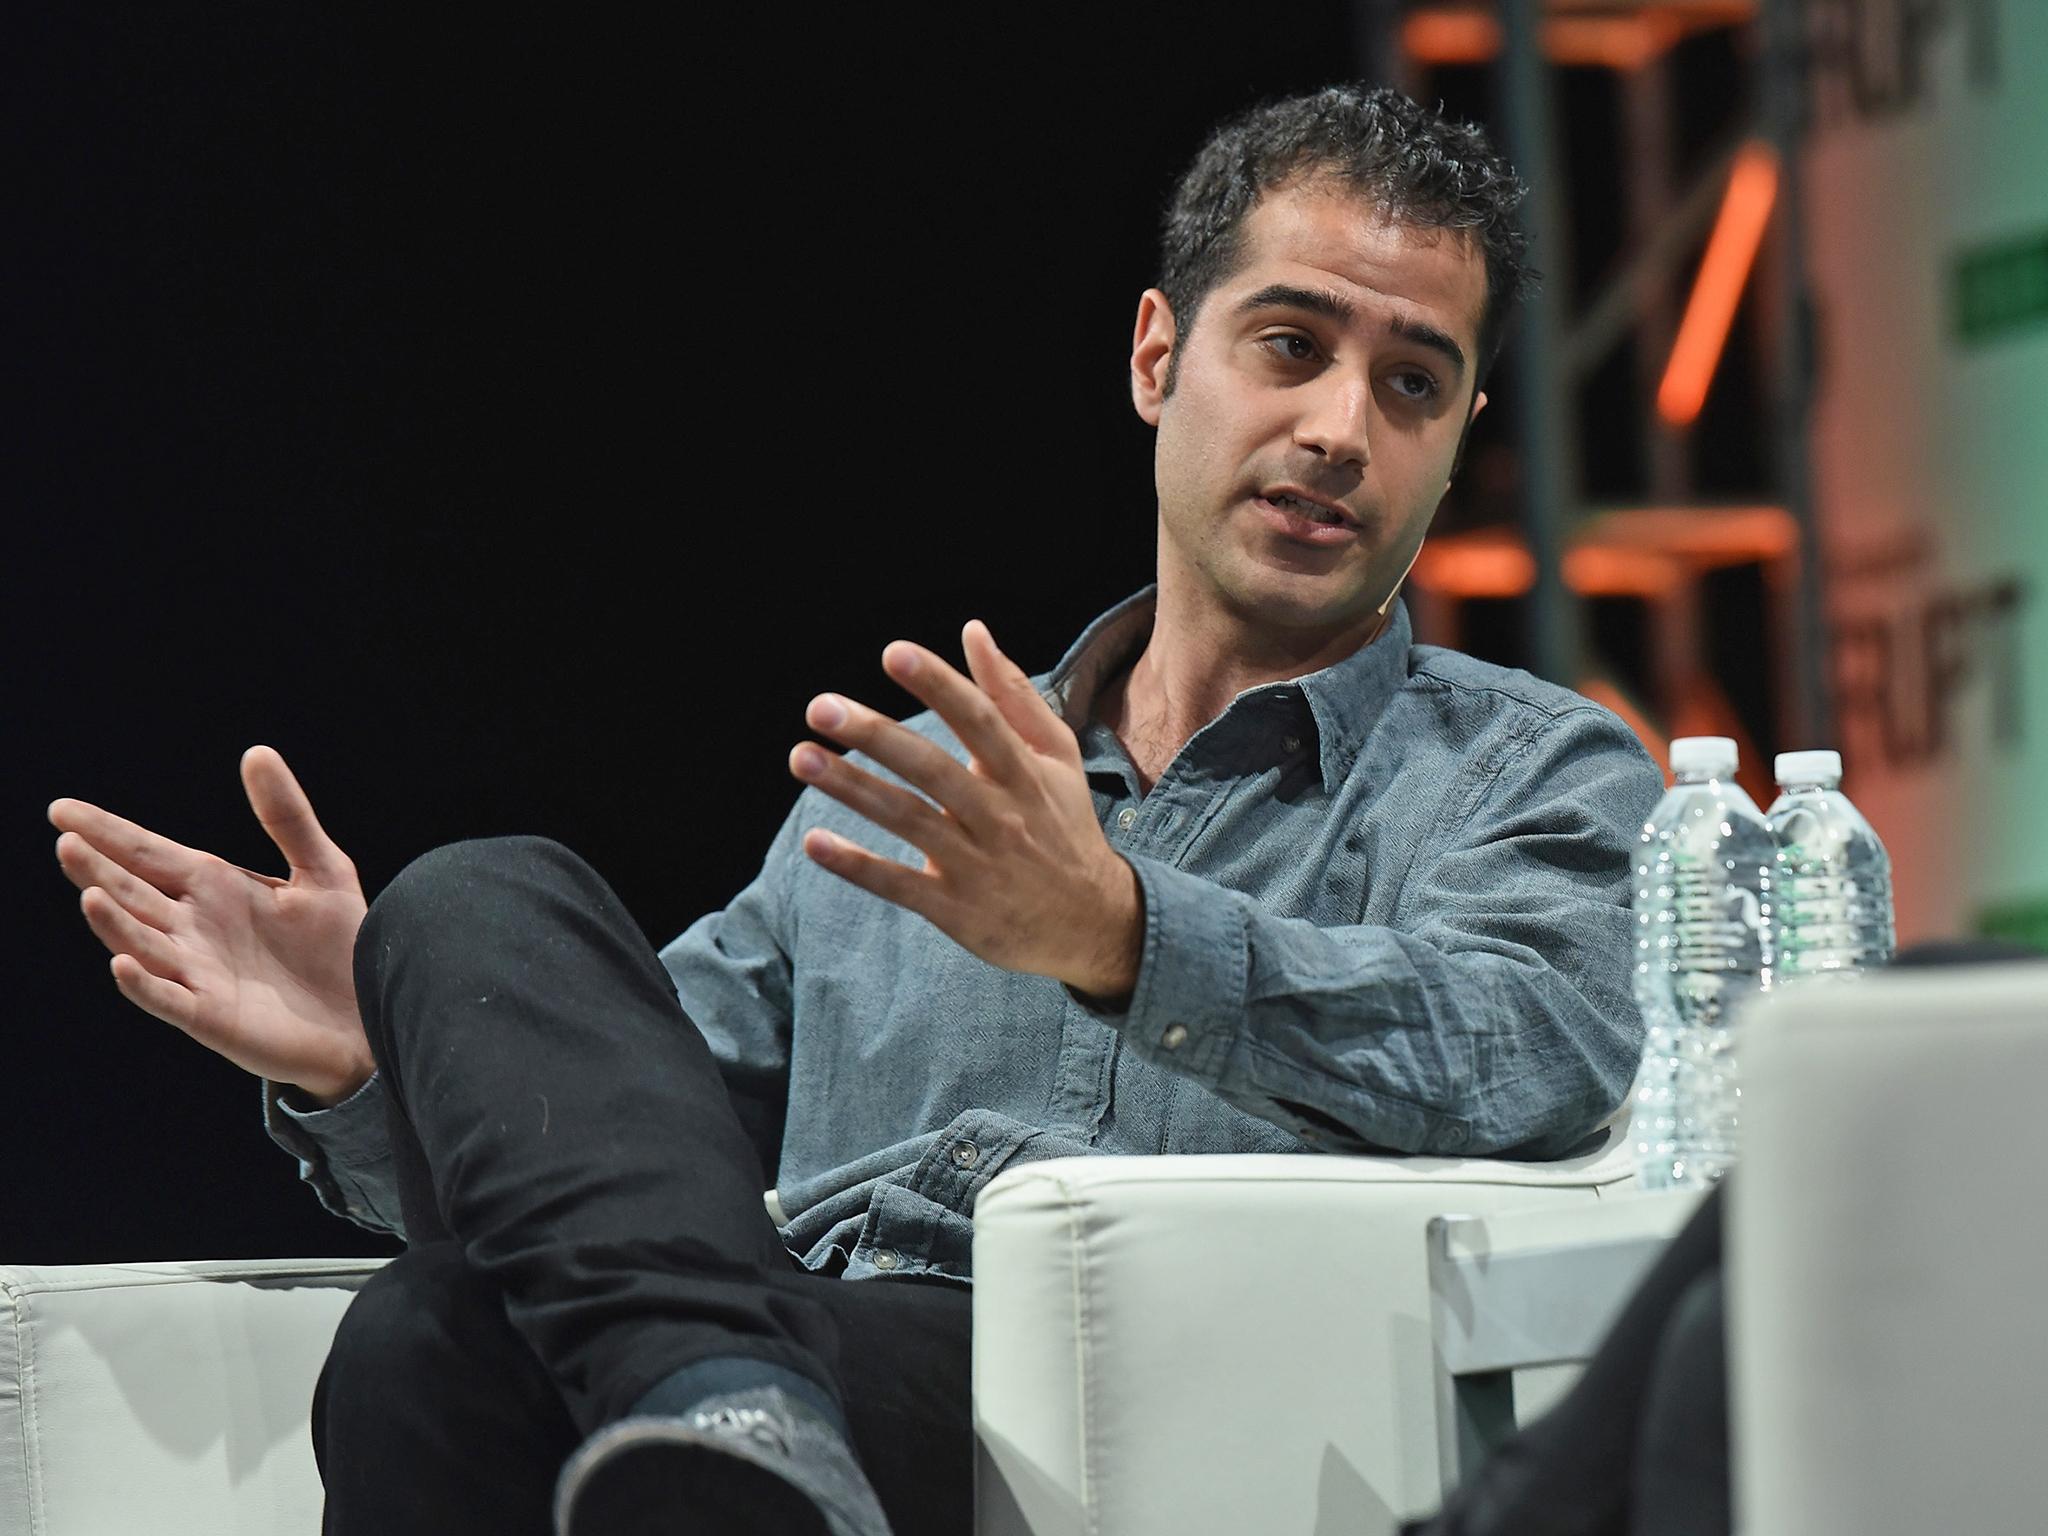 Kayvon Beykpour says his app is 'a place where you can see the world through people's eyes'